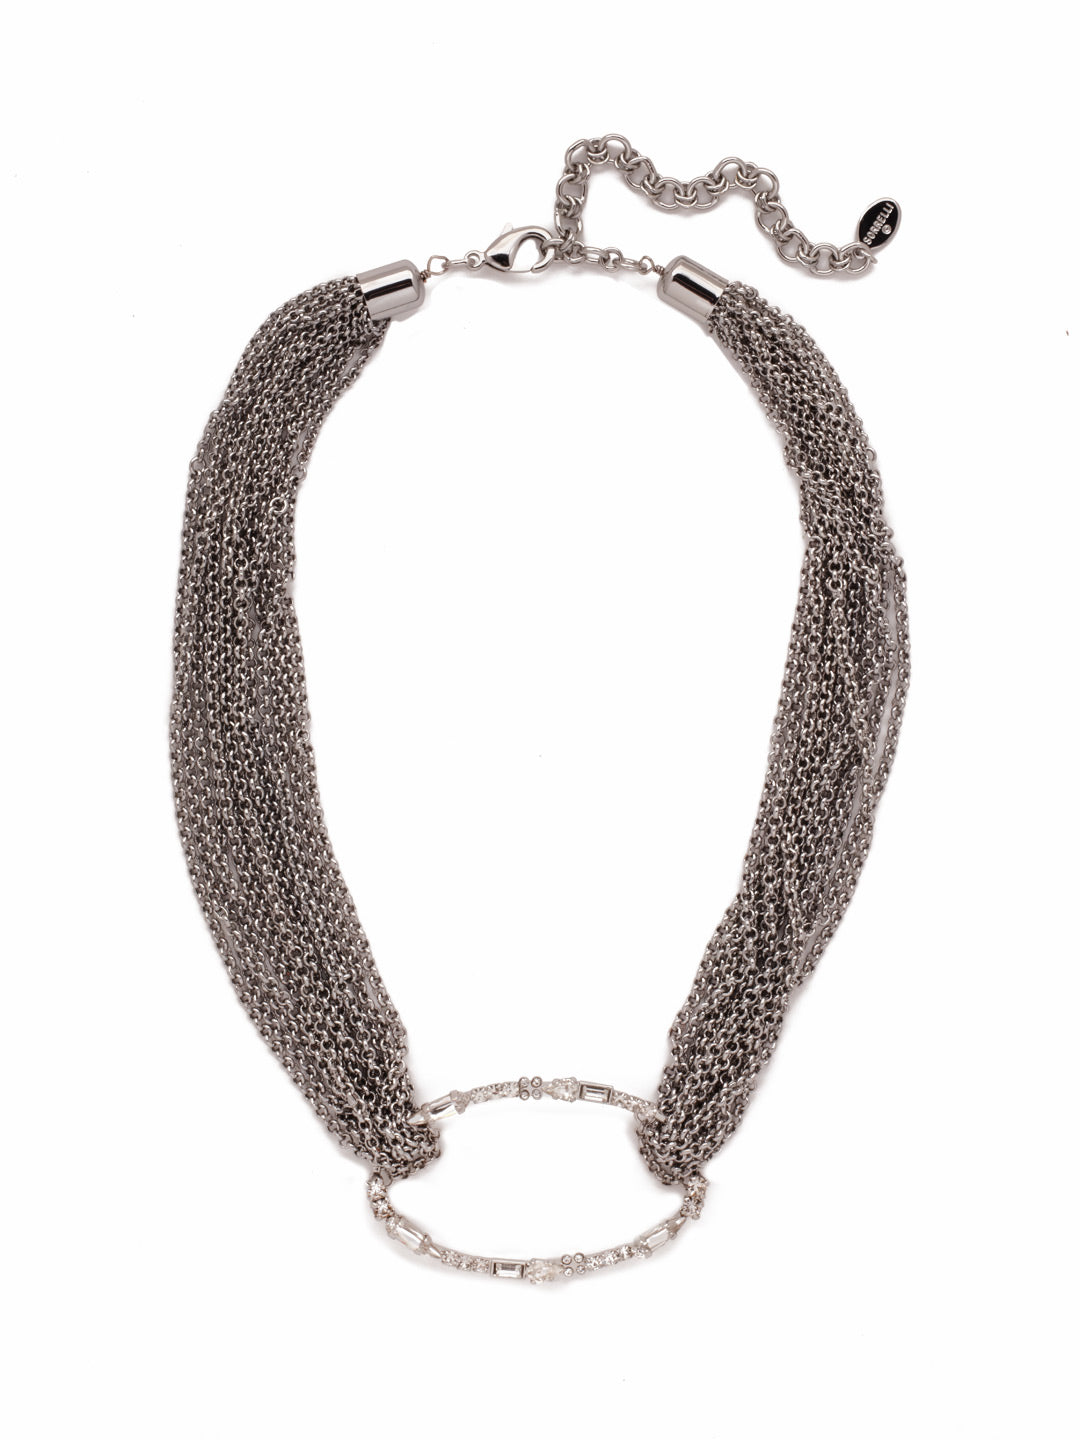 Ruth Chain necklace